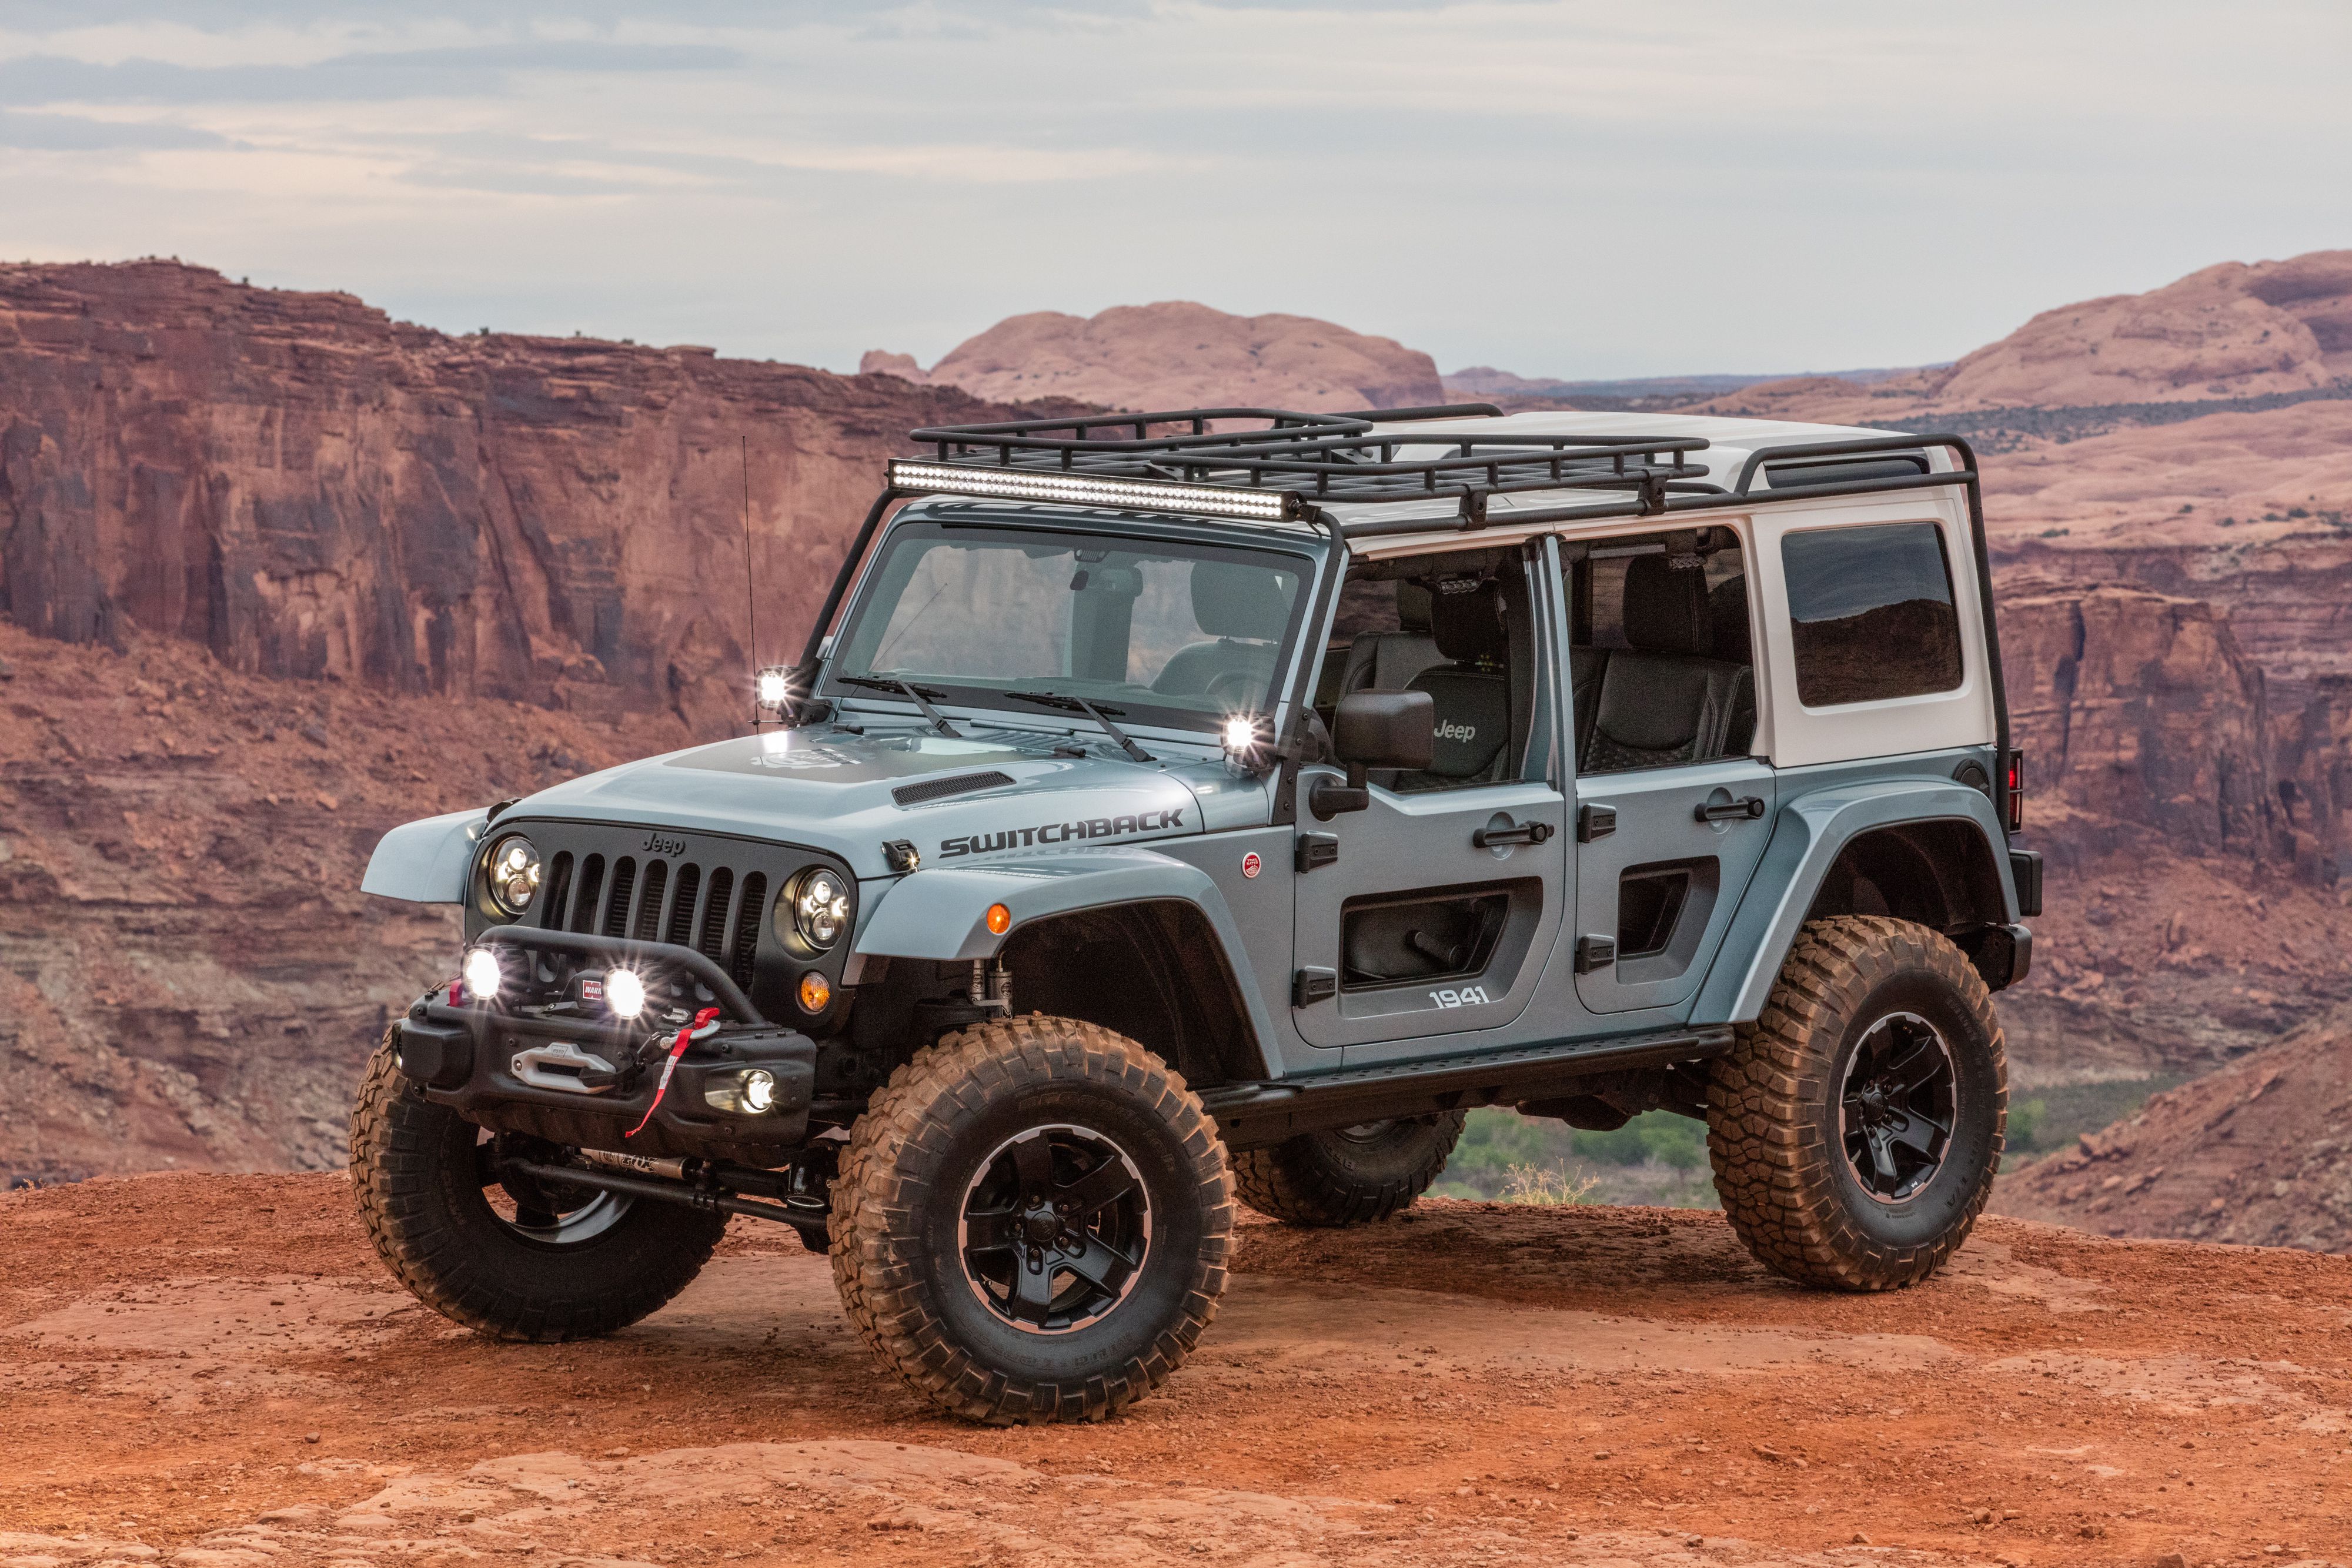 Jeep Wrangler hd specifications